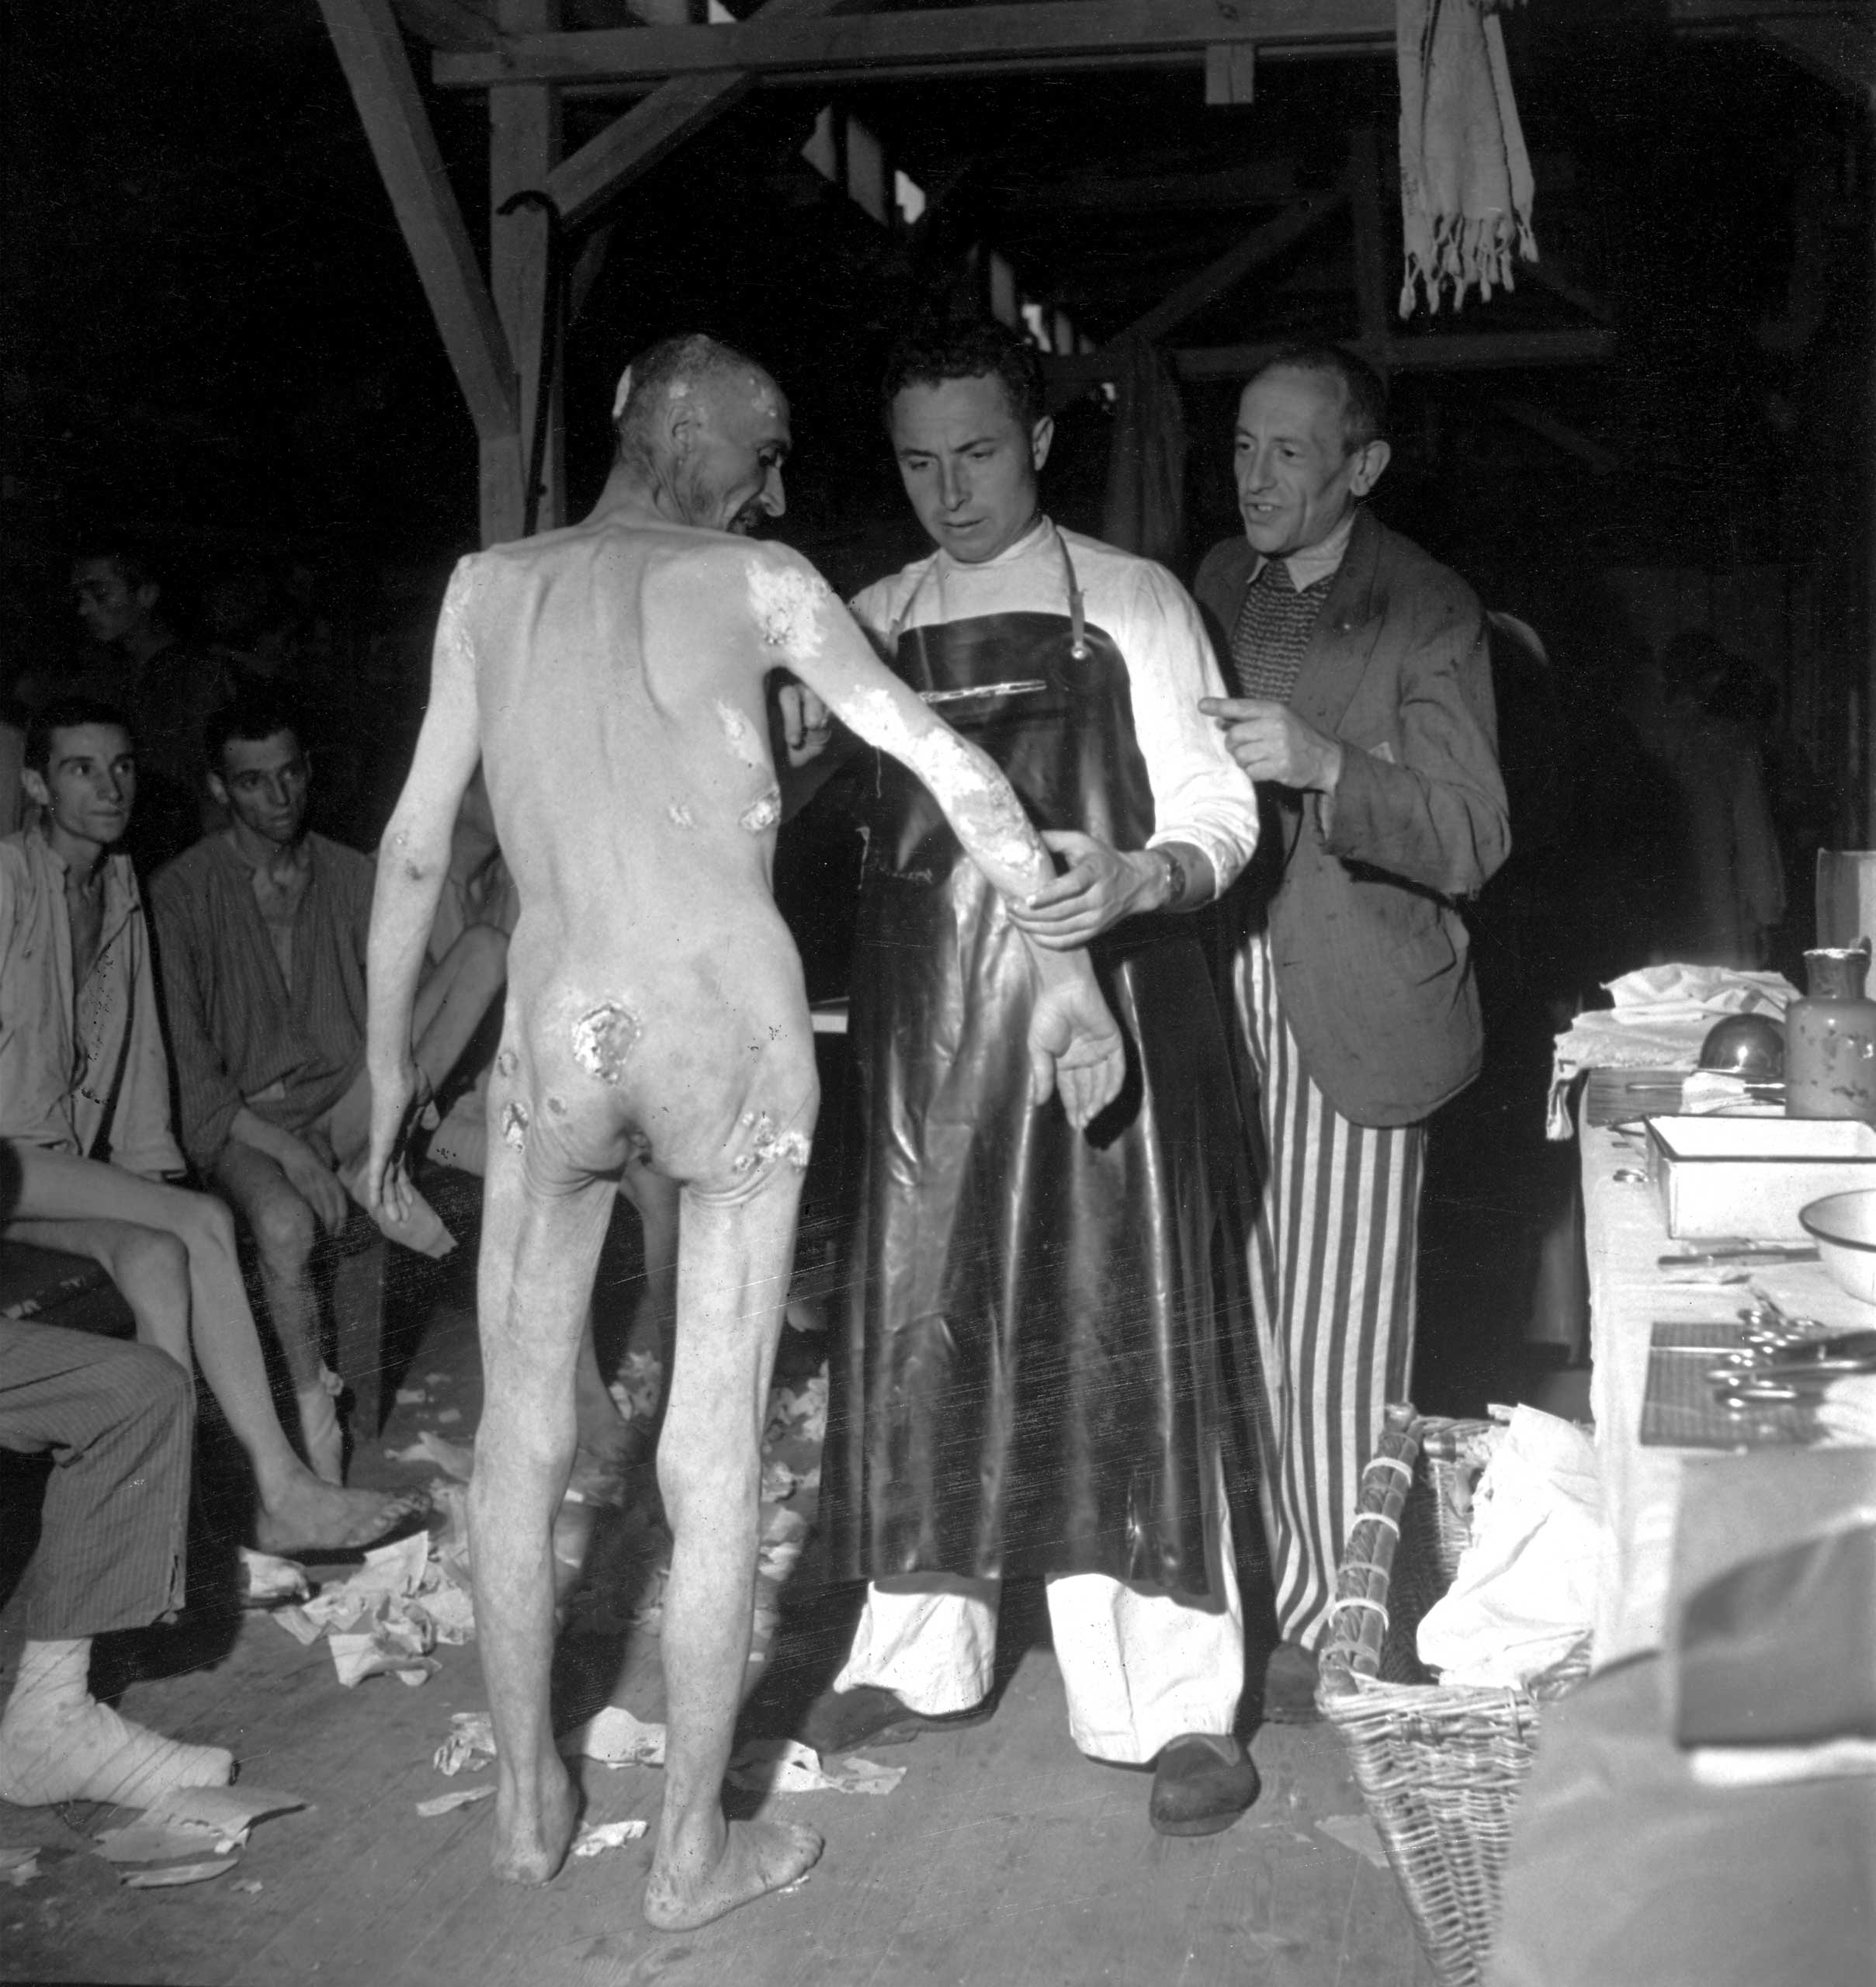 Not published in LIFE. Examining Buchenwald prisoners after the camp's liberation by U.S. troops, April 1945.